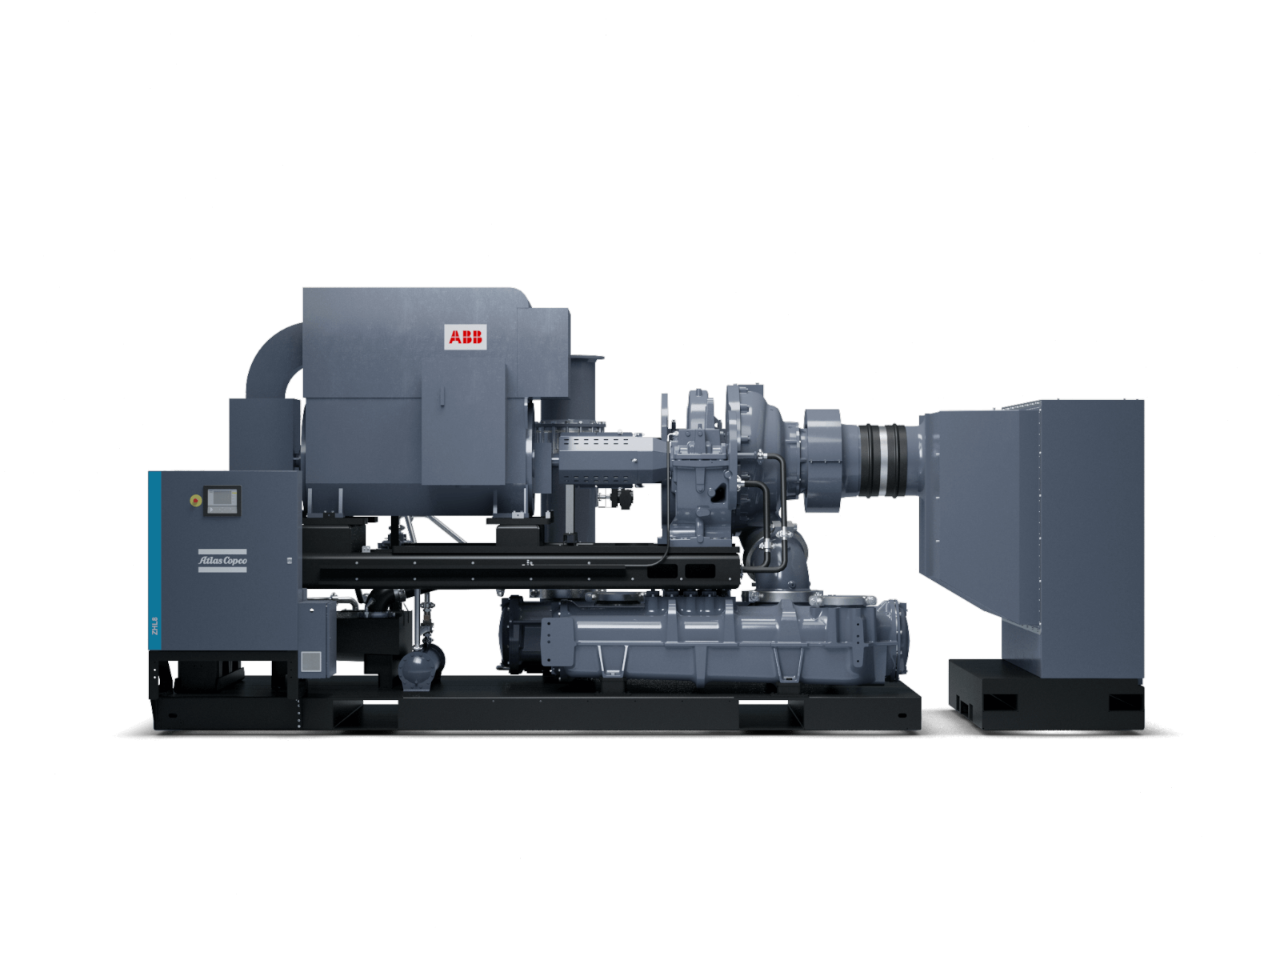 zhl-single-stage-centrifugal-compressors-image-1684950835.png